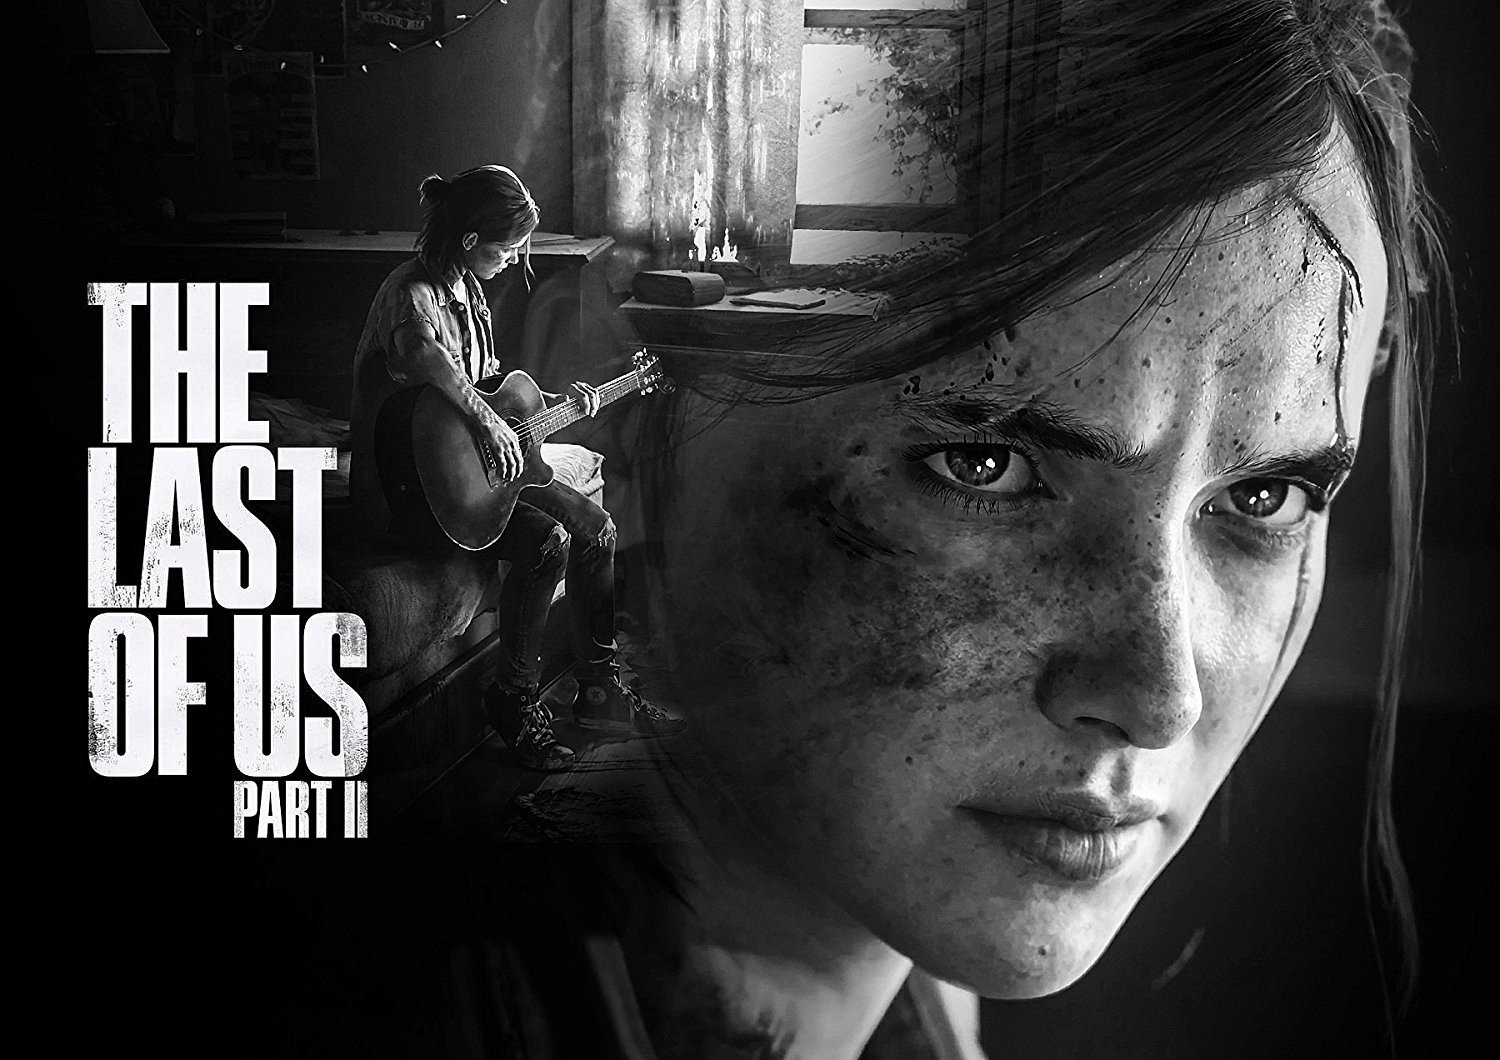 An honest look at the TLOU2 Metacritic review bombing